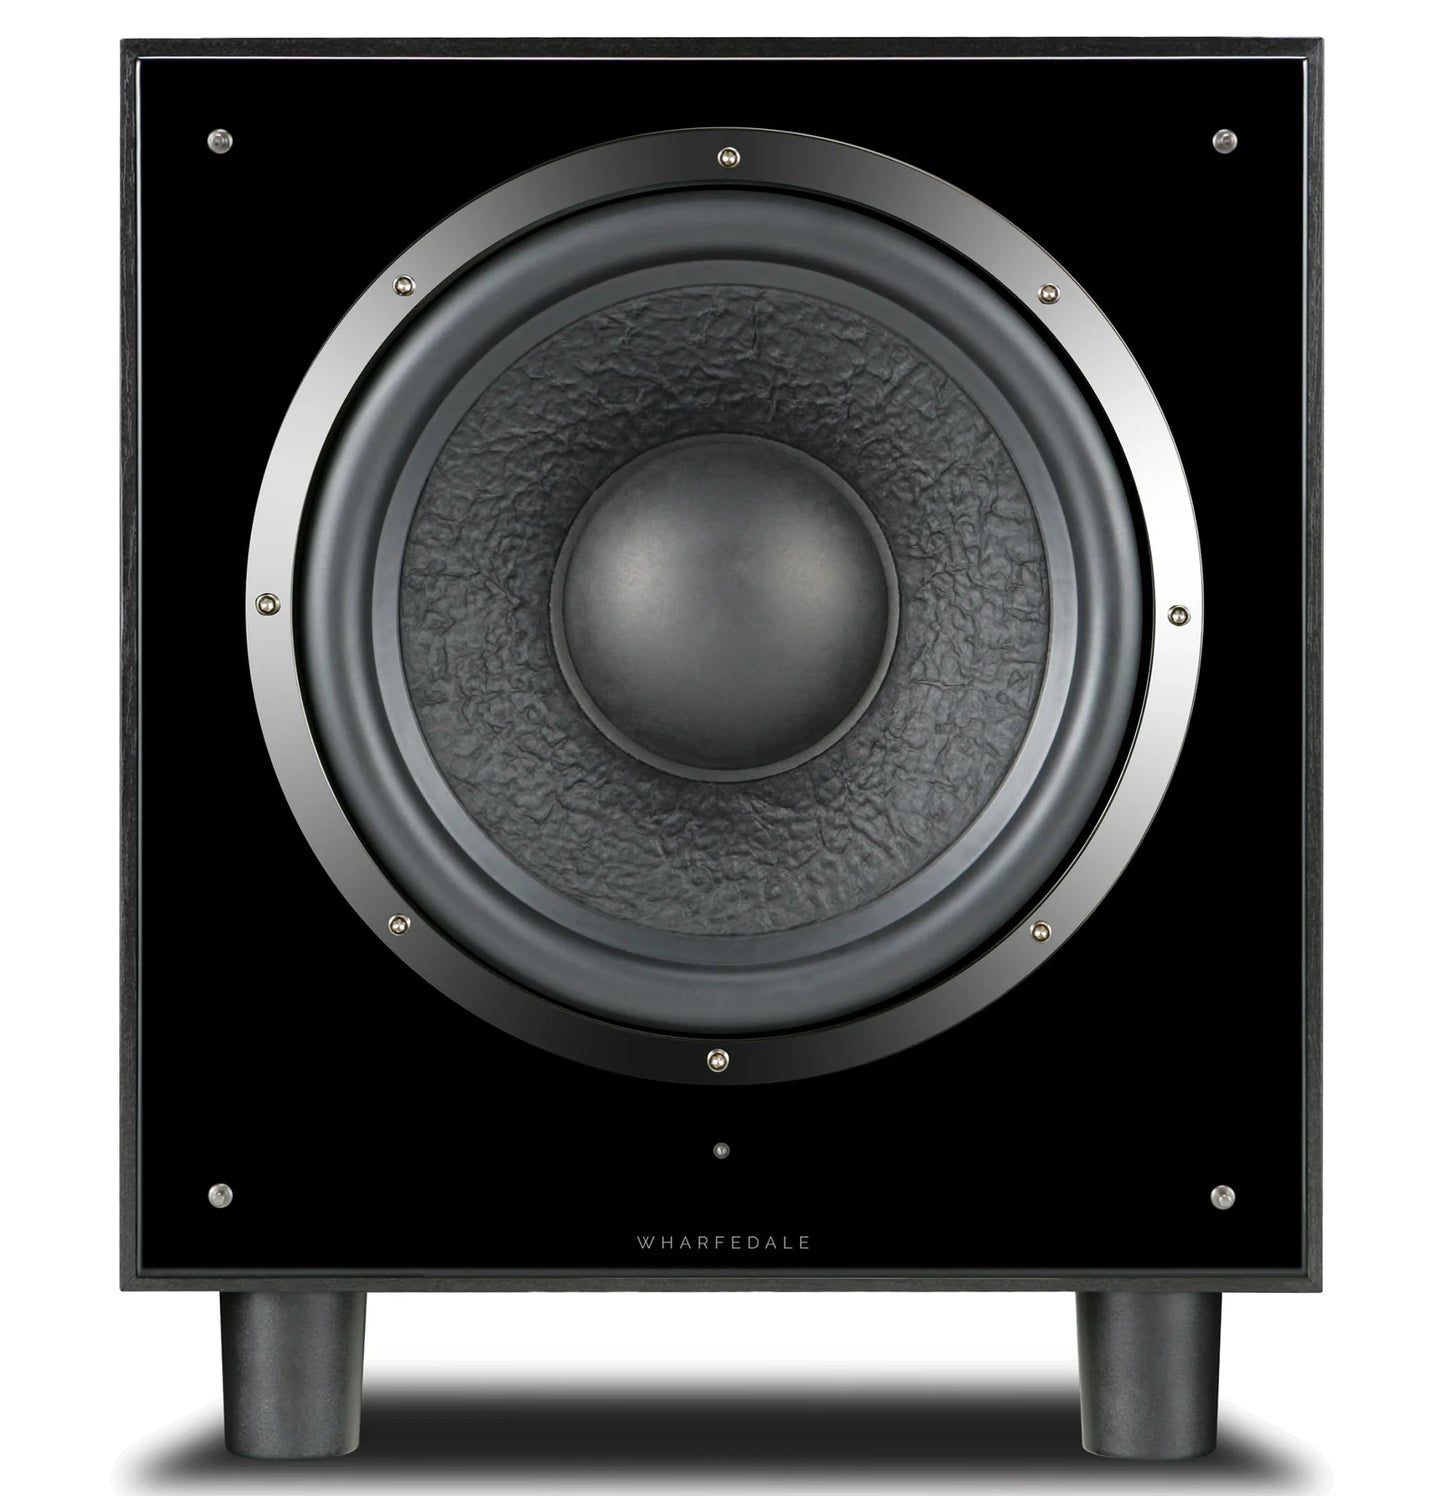 Wharfedale SW12- 300W RMS 12 inch ported long throw subwoofer